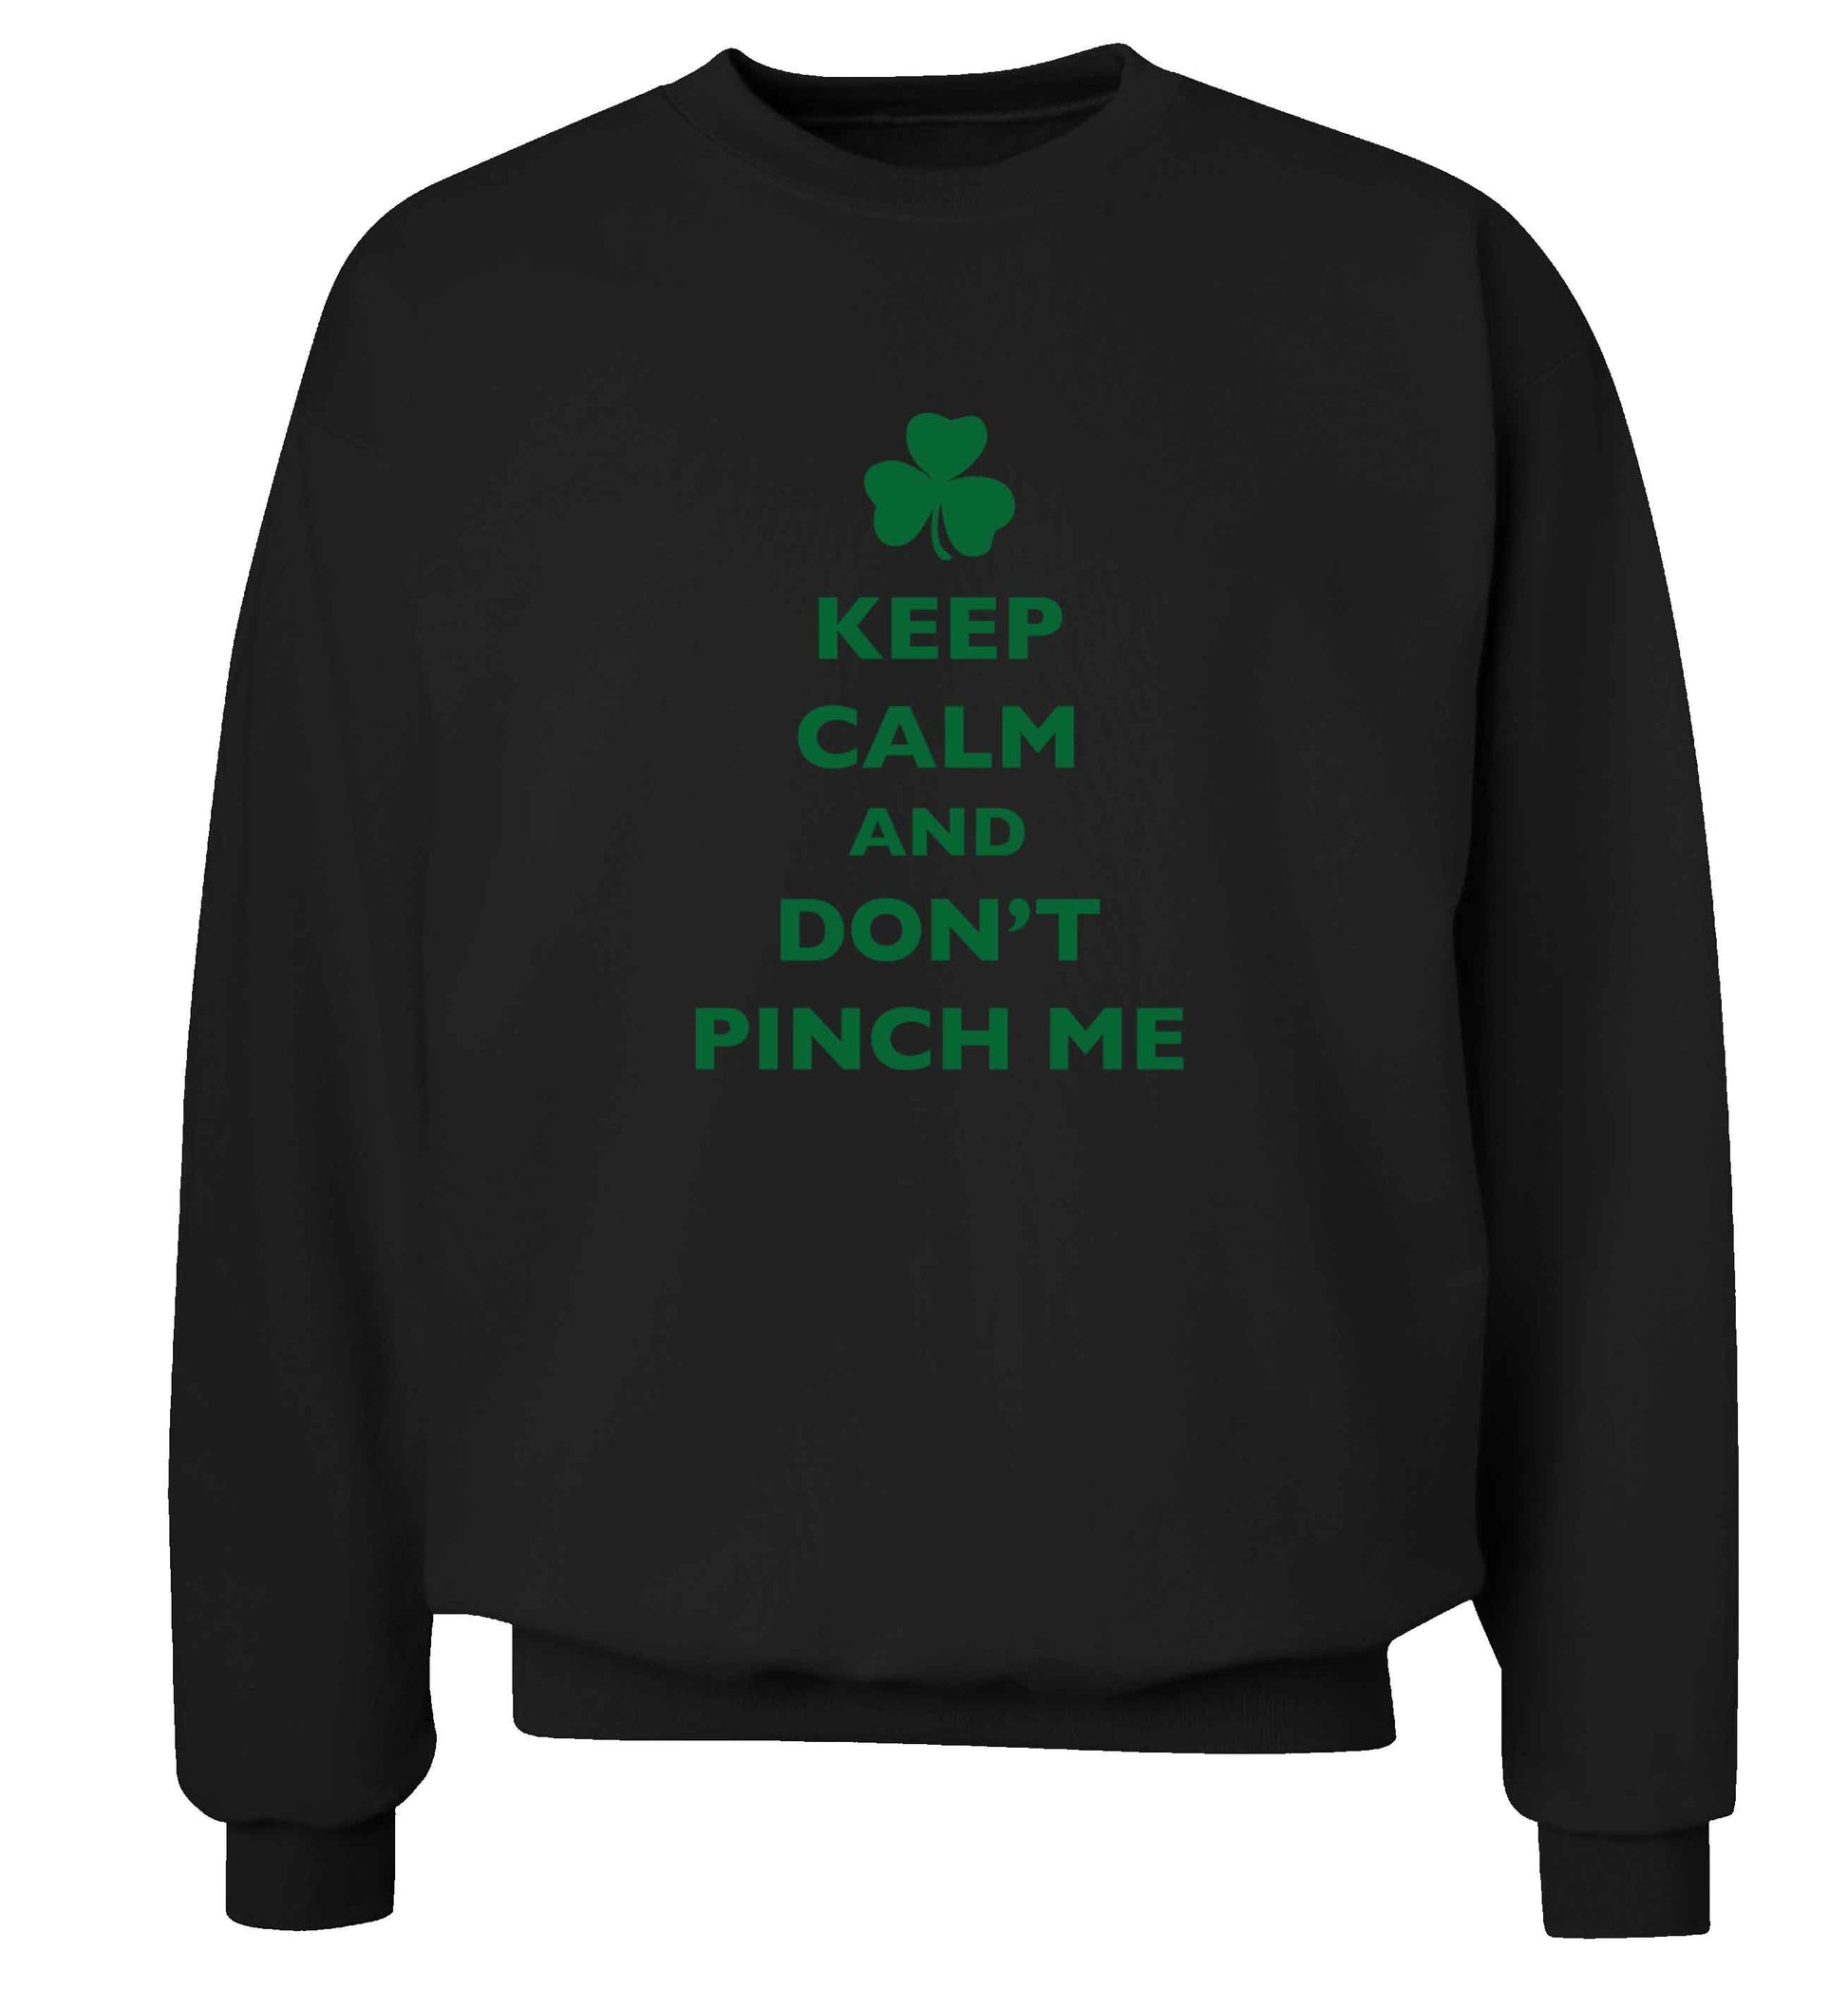 Keep calm and don't pinch me adult's unisex black sweater 2XL